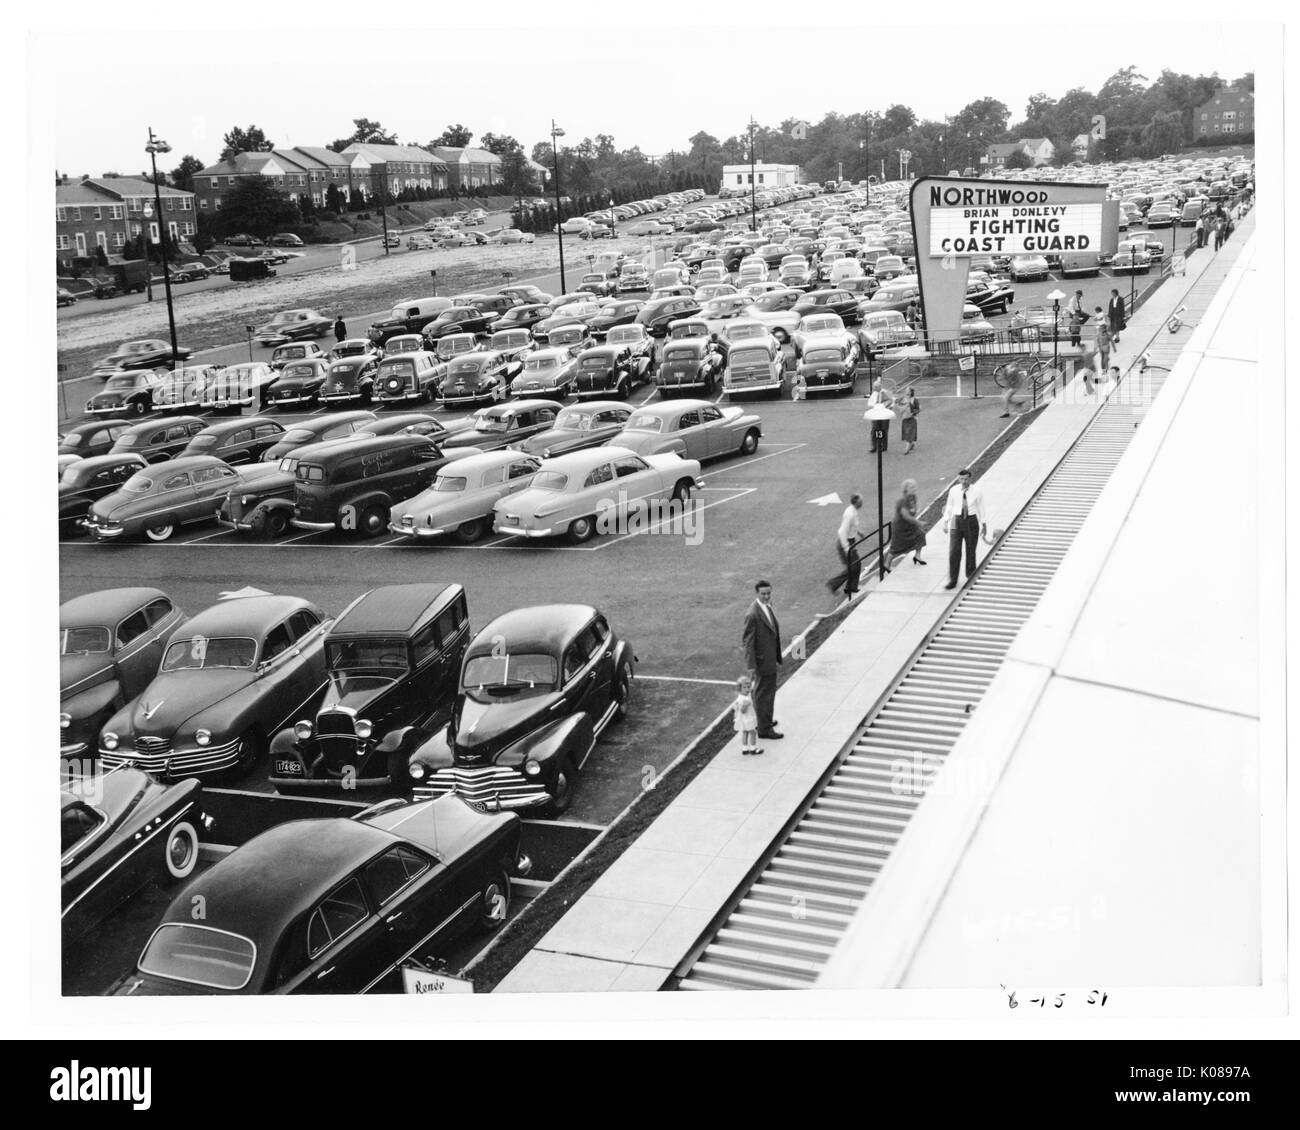 View of a packed parking lot from the roof of the Northwood Shopping Center, across the street from the center and parking lot are brick row homes and trees, people are heading to or from their cars, the center's sign is advertising 'FIGHTING COAST GUARD', Baltimore, Maryland, 1951. Stock Photo